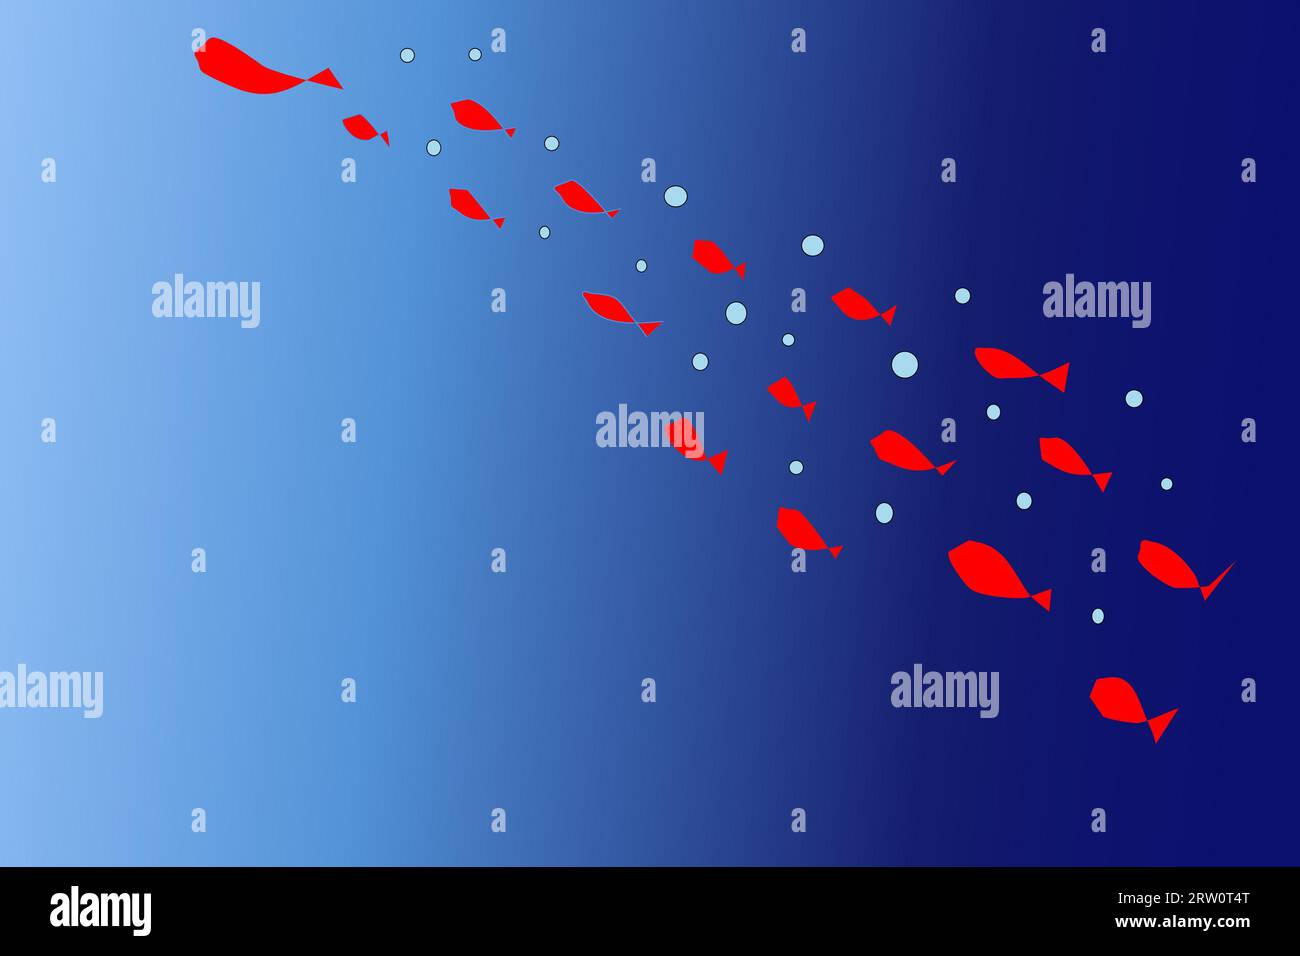 Shoal of red fish in the sea, illustration Stock Photo